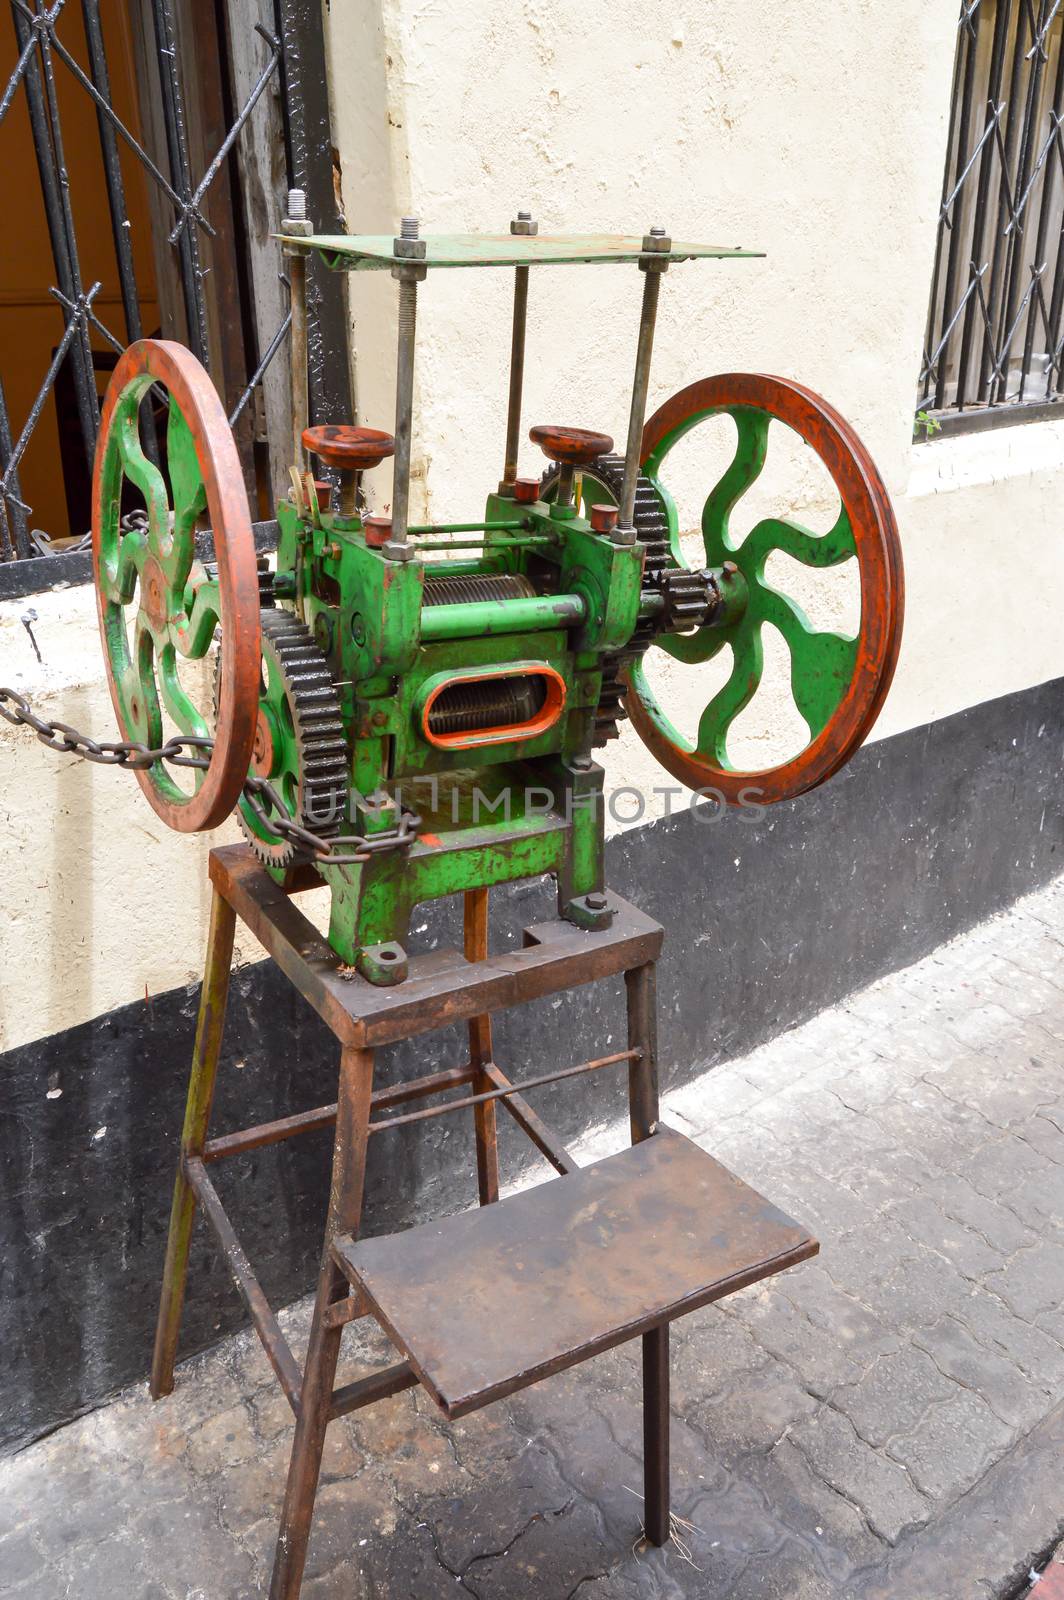 Old sugar cane press in a street  by Philou1000